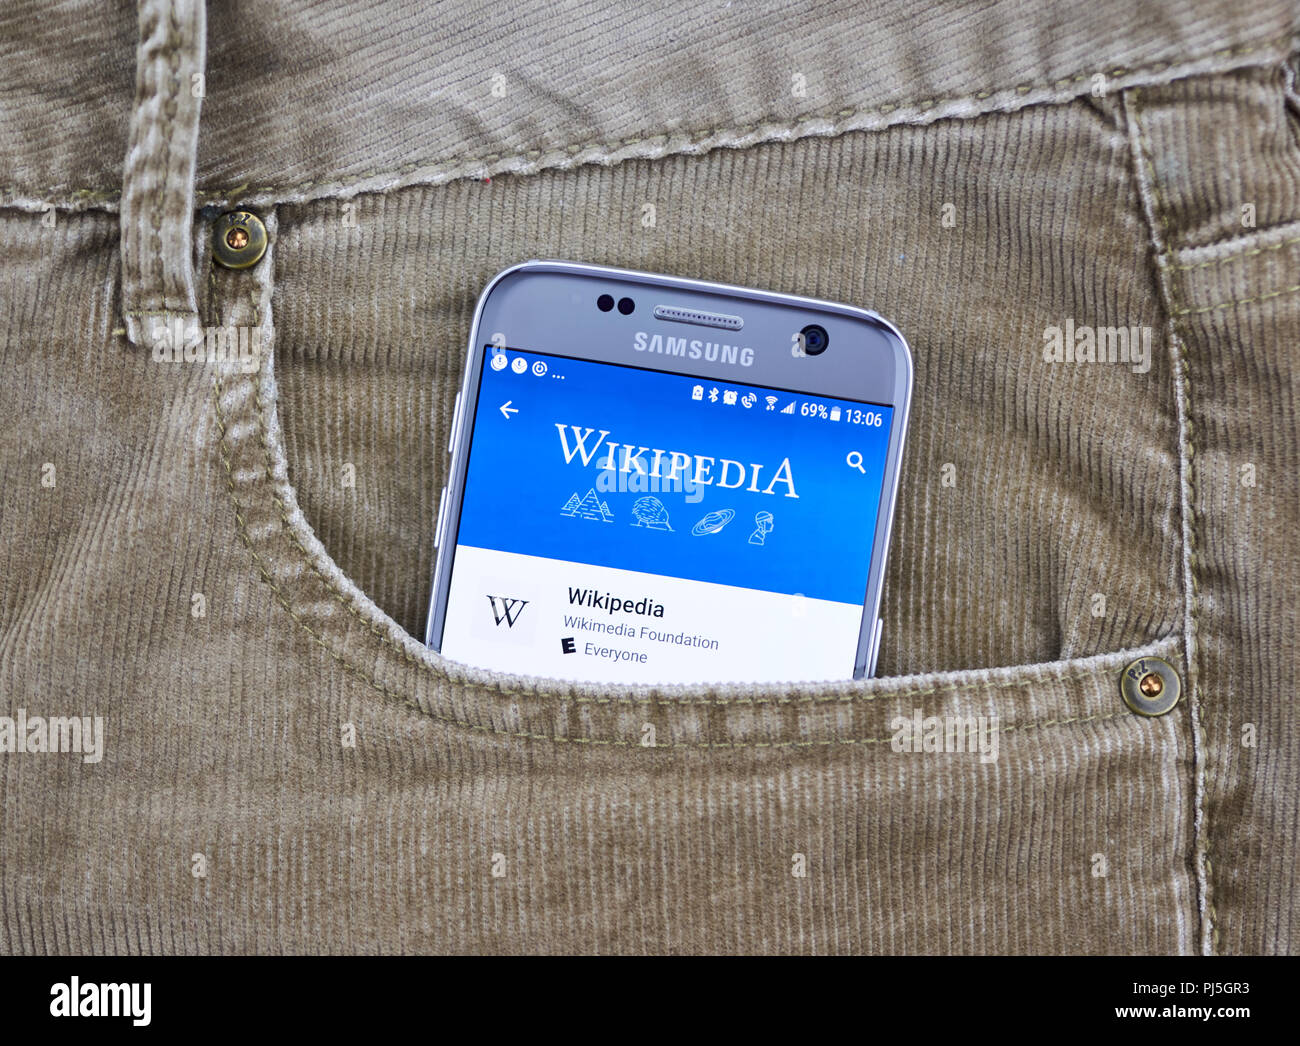 MONTREAL, CANADA - OCTOBER 10, 2017: Wikipedia mobile application on a cellphone screen in a jeans pocket. Wikipedia is a multilingual free encycloped Stock Photo